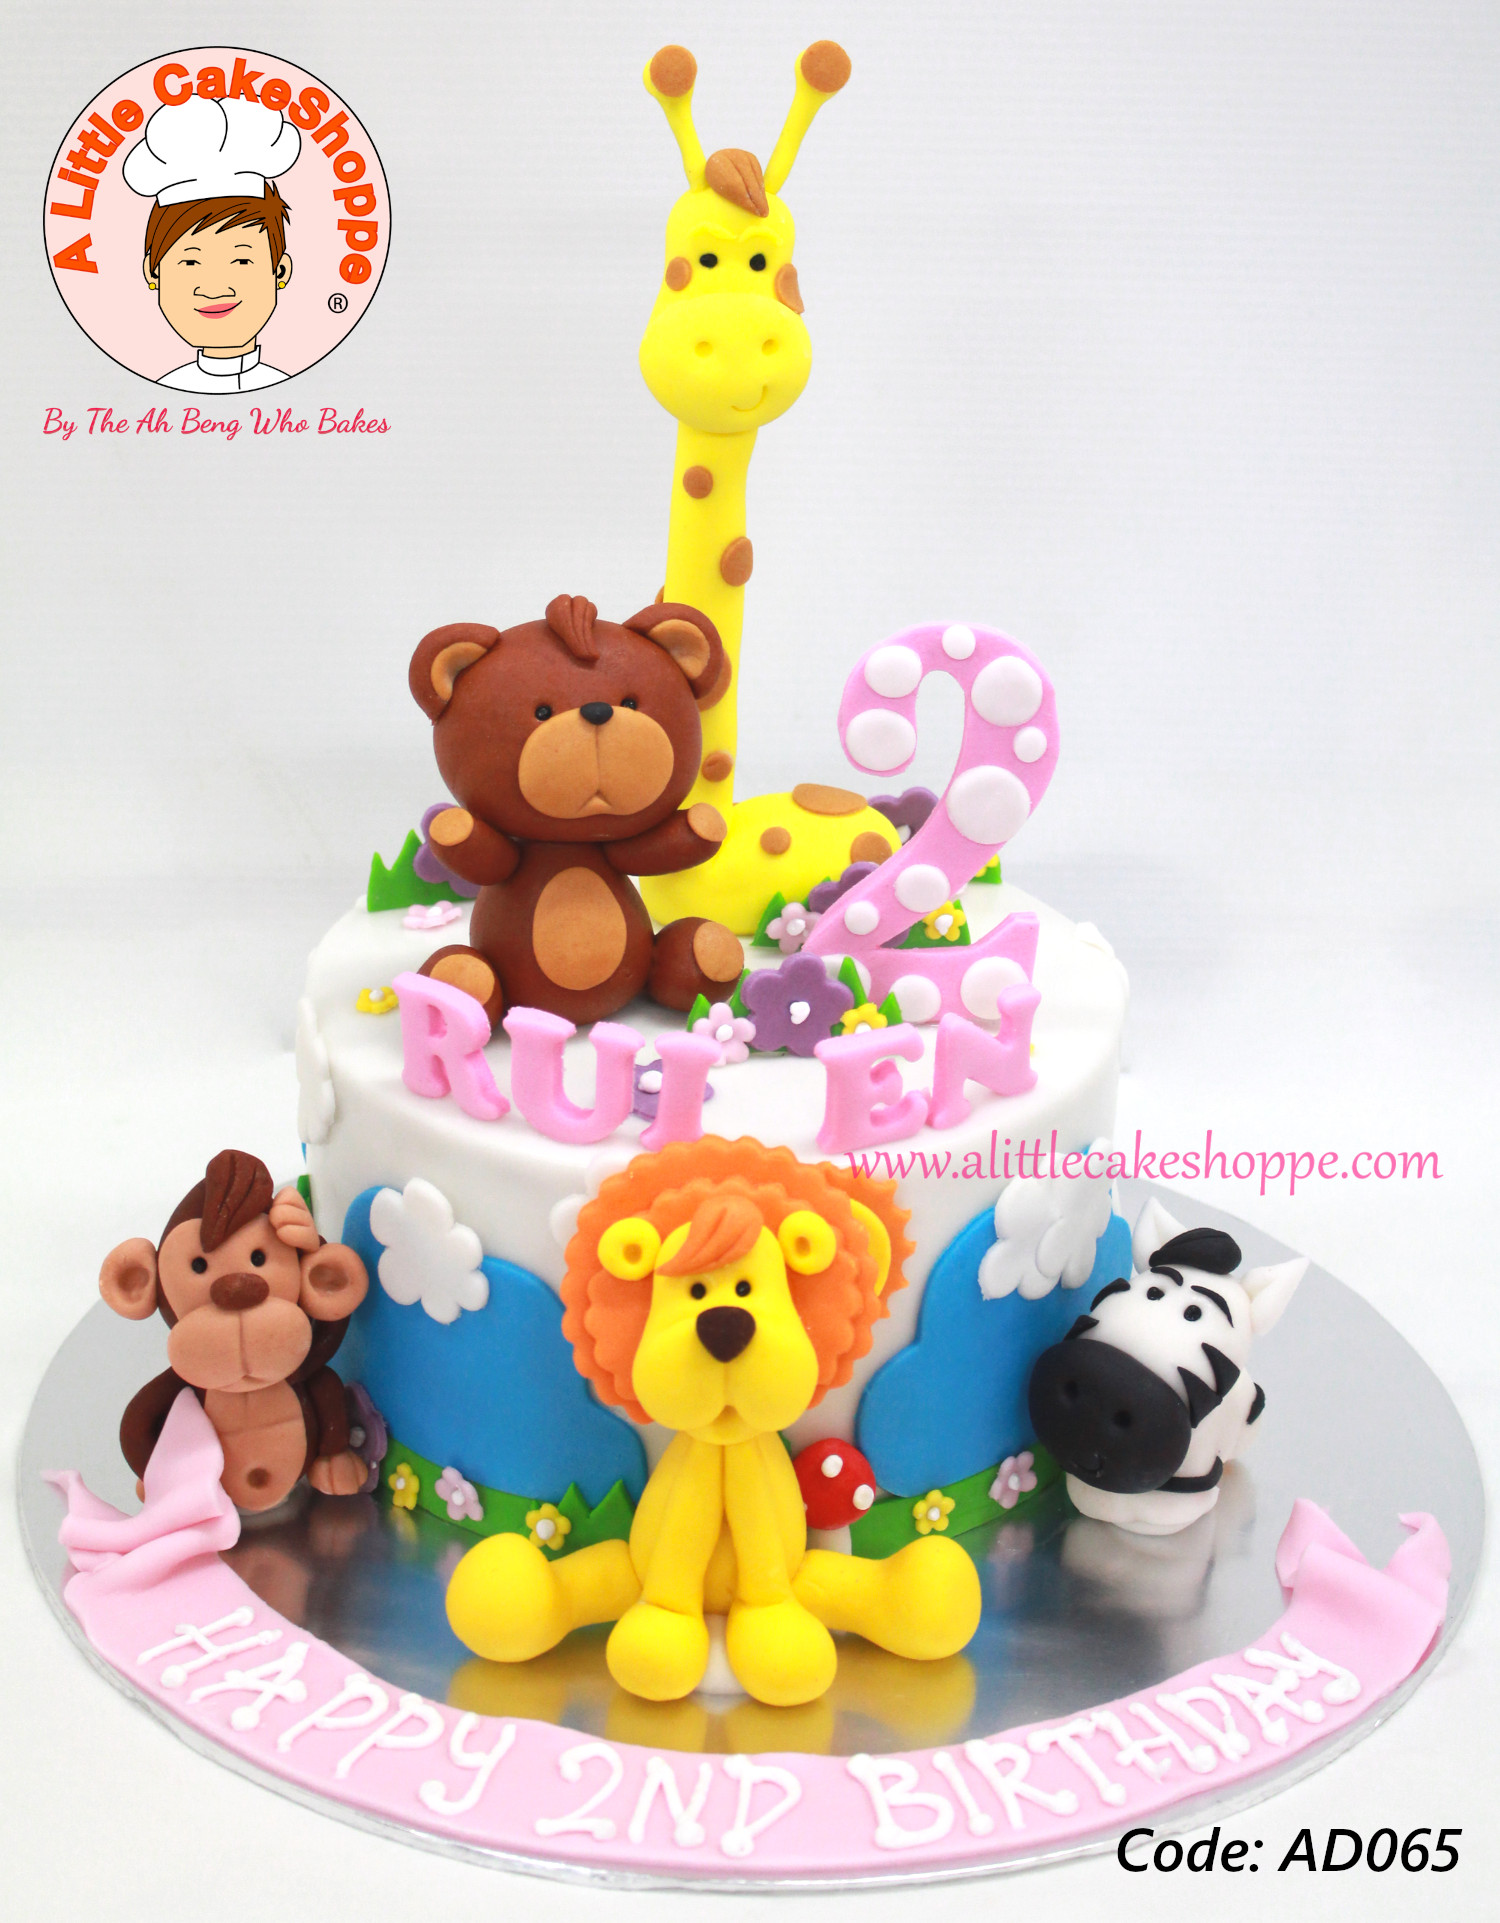 Best Cake Shop Singapore Delivery Best Customised Cake Shop Singapore customise cake custom cake 2D 3D birthday cake cupcakes desserts wedding corporate events anniversary 1st birthday 21st birthday fondant fresh cream buttercream cakes alittlecakeshoppe a little cake shoppe compliments review singapore bakers SG cake shop cakeshop ah beng who bakes sgbakes novelty cakes sgcakes licensed sfa nea cake delivery celebration cakes kids birthday cake surprise cake adult children animal